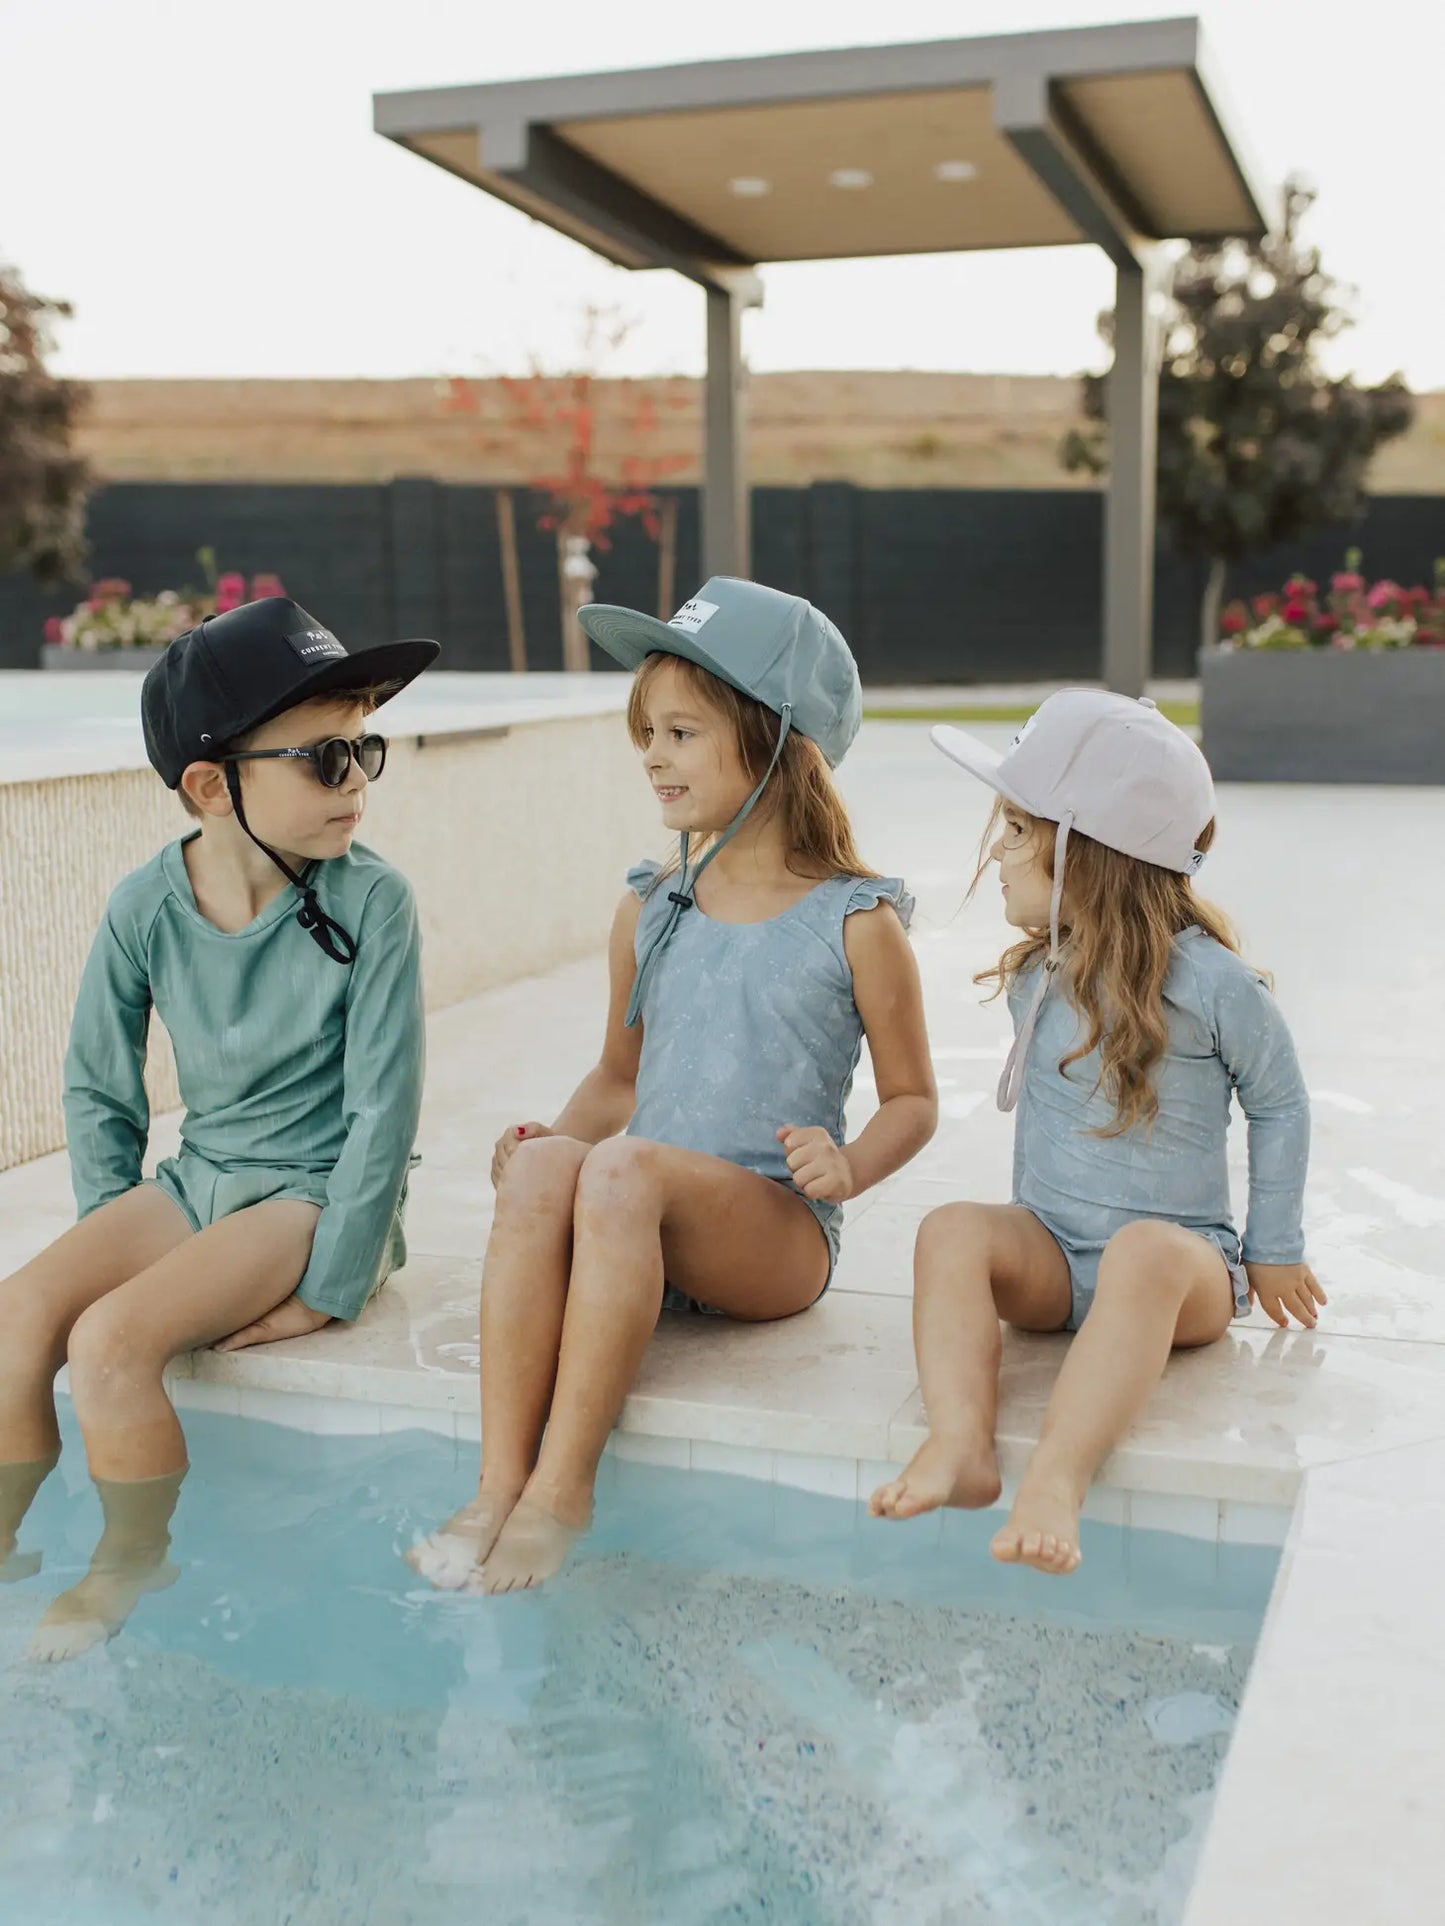 Current Tyed - Waterproof Snapback Hat - Sizes for Littles + Adults (Beige)